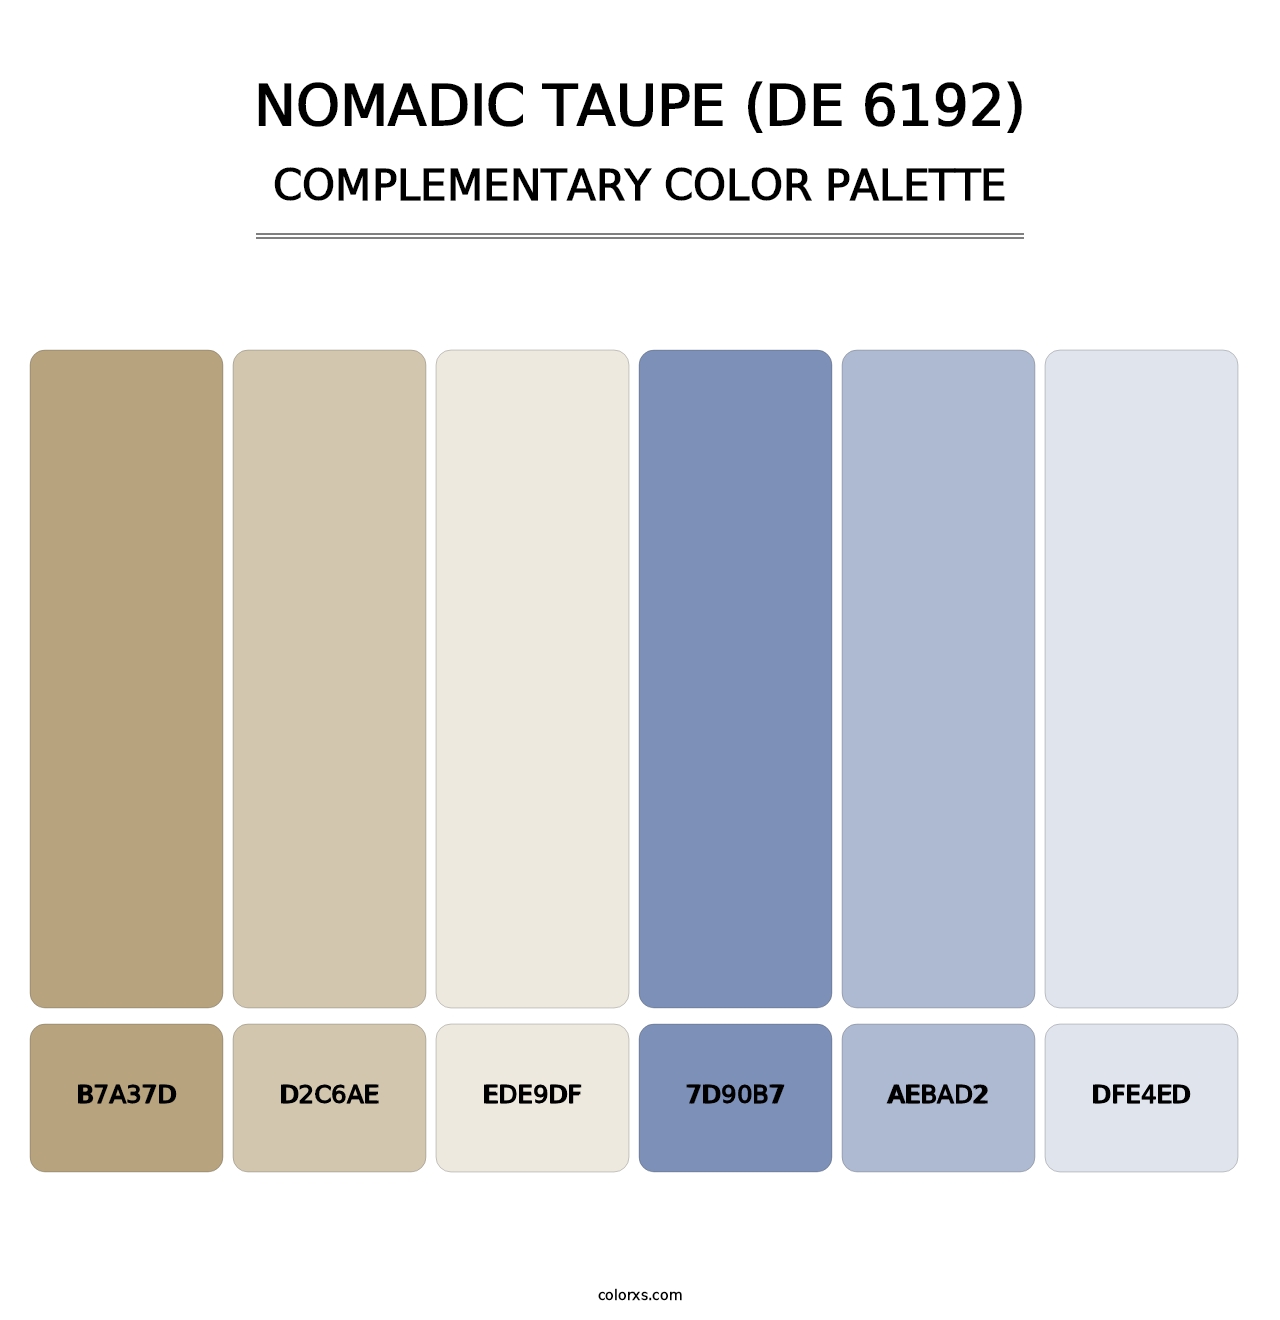 Nomadic Taupe (DE 6192) - Complementary Color Palette